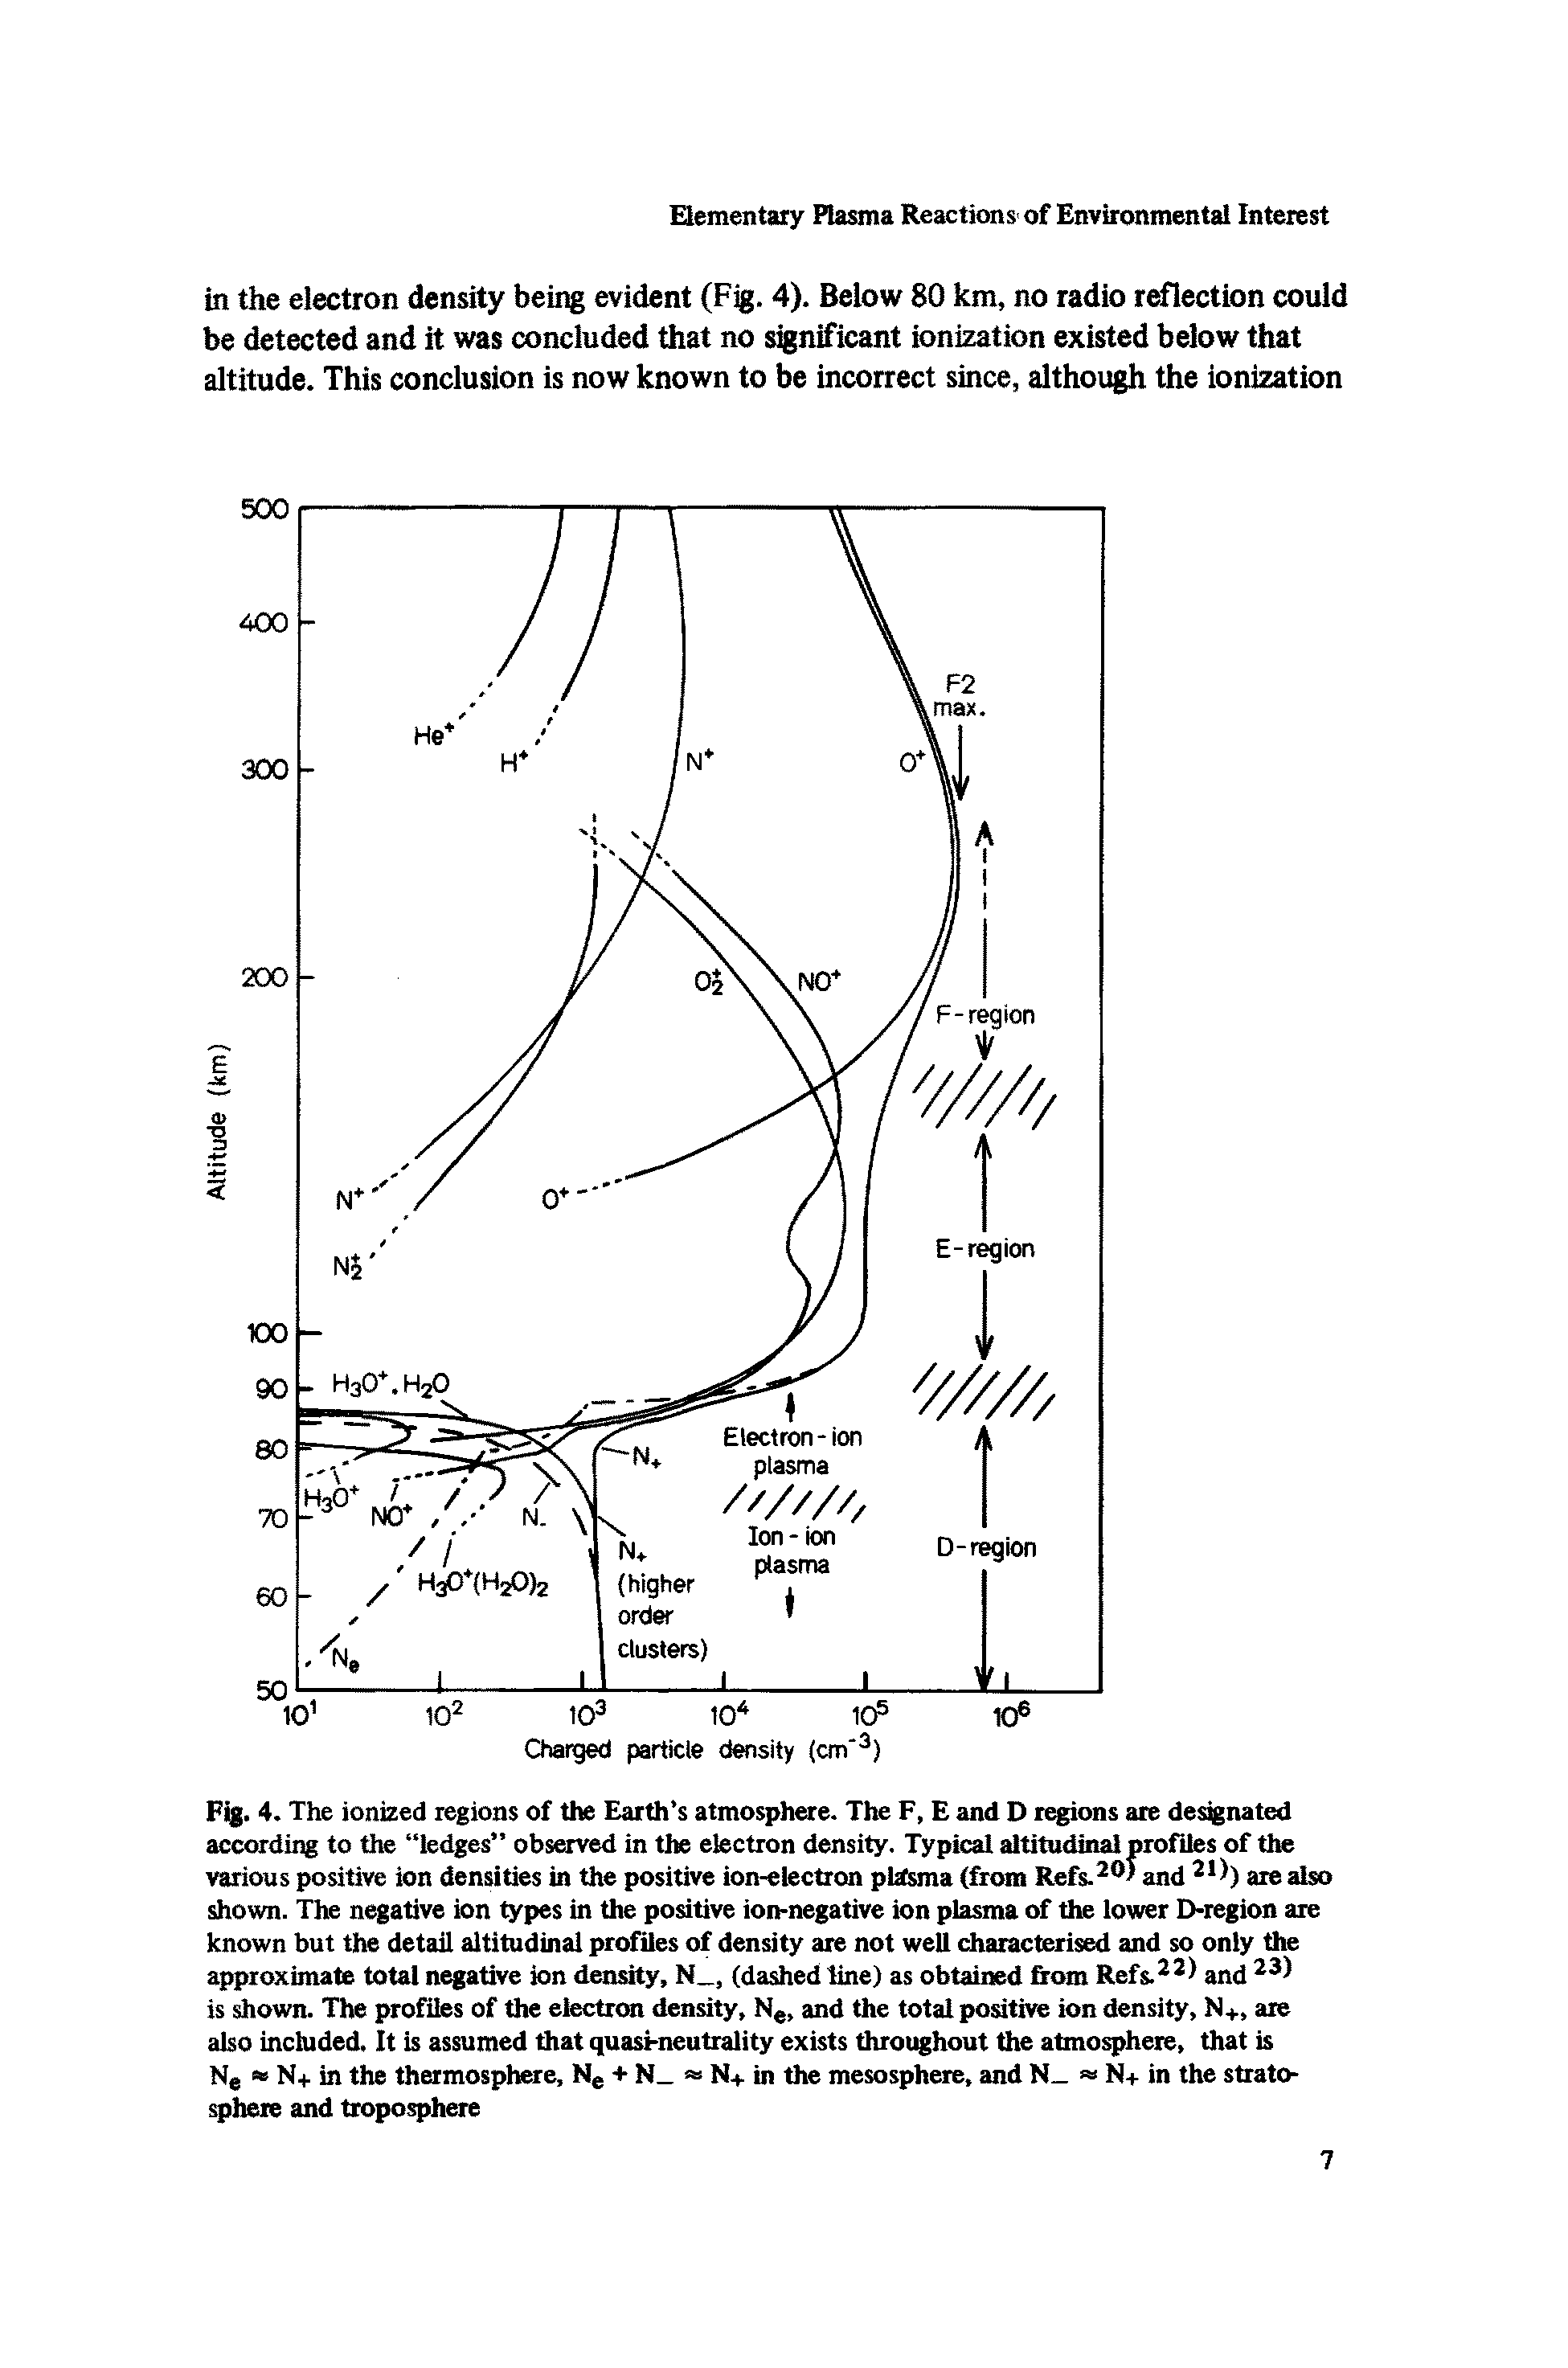 Fig. 4. The ionized regions of the Earth s atmosphere. The F, E and D regions are designated according to the ledges observed in the electron density. Typical altitudinal profiles of the various positive ion densities in the positive ion-electron plrtsma (from Refs.20 and 2I)) are also shown. The negative ion types in the positive ion-negative ion plasma of the lower D-region are known but the detail altitudinal profiles of density are not well characterised and so only the approximate total negative ion density, N, (dashed line) as obtained from Refs.22) and 23) is shown. The profiles of the electron density, Ne, and the total positive ion density, N+, are also included. It is assumed that quasi-neutrality exists throughout the atmosphere, that is Ne N+ in the thermosphere, Ne + N N+ in the mesosphere, and N N+ in the stratosphere and troposphere...